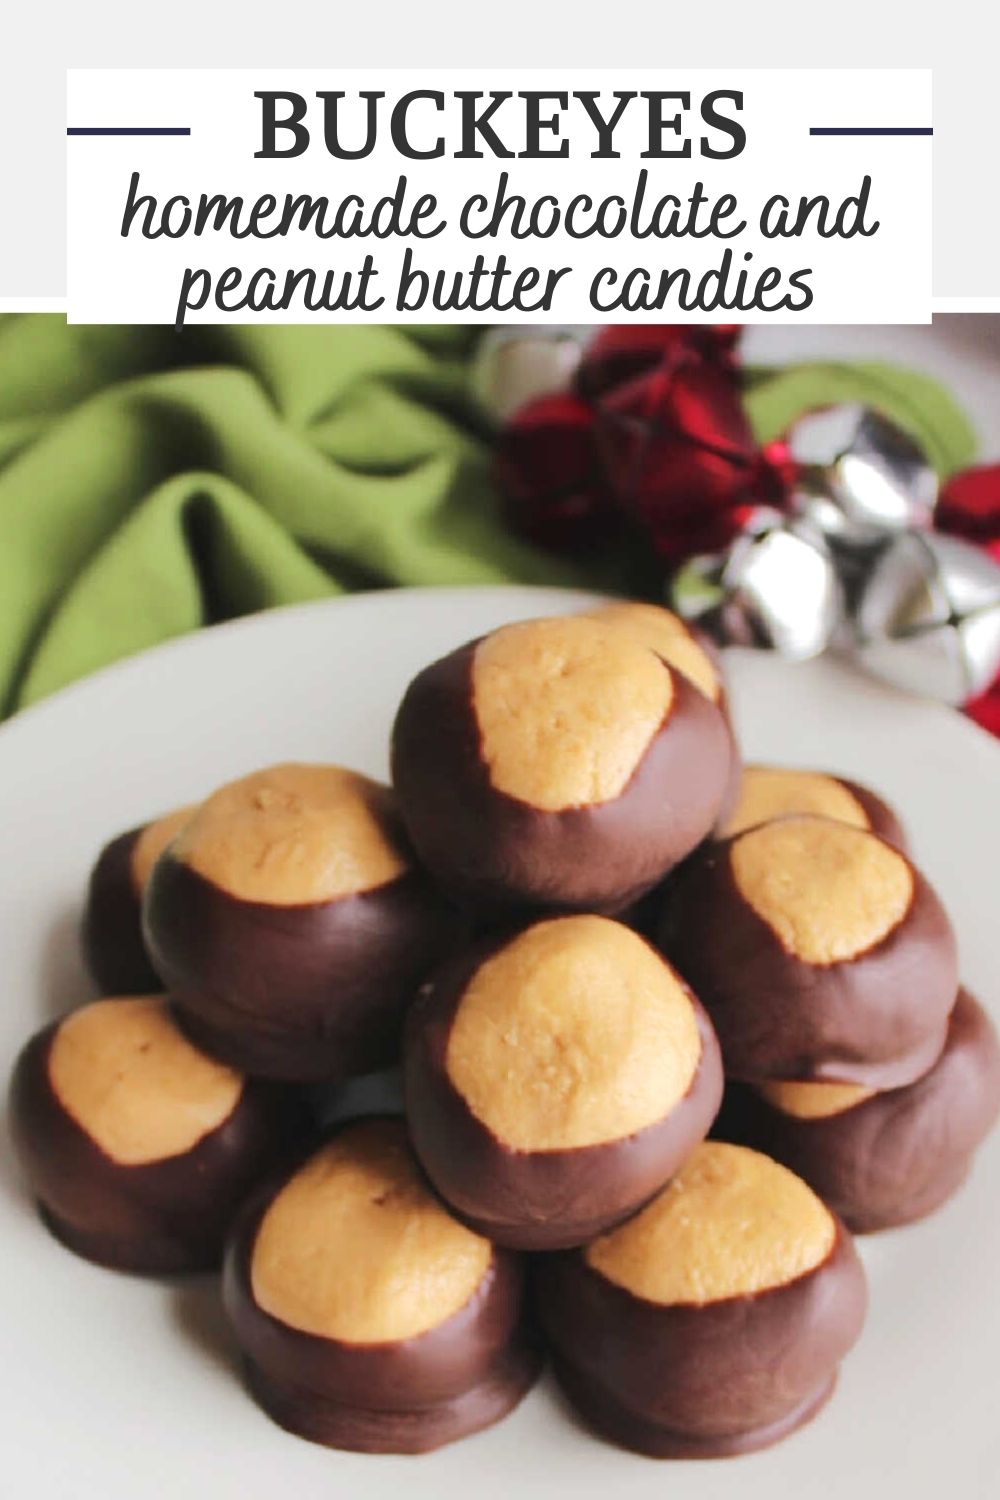 Turn peanut butter and chocolate into delicious no bake candy. Peanut butter buckeye candies are a Christmastime must have in our family. You may know them as chocolate peanut butter balls, we but we make ours to look like a buckeye. They are easy to make, which is good because they disappear quickly. These buckeyes deserve a place on your holiday candy making list!